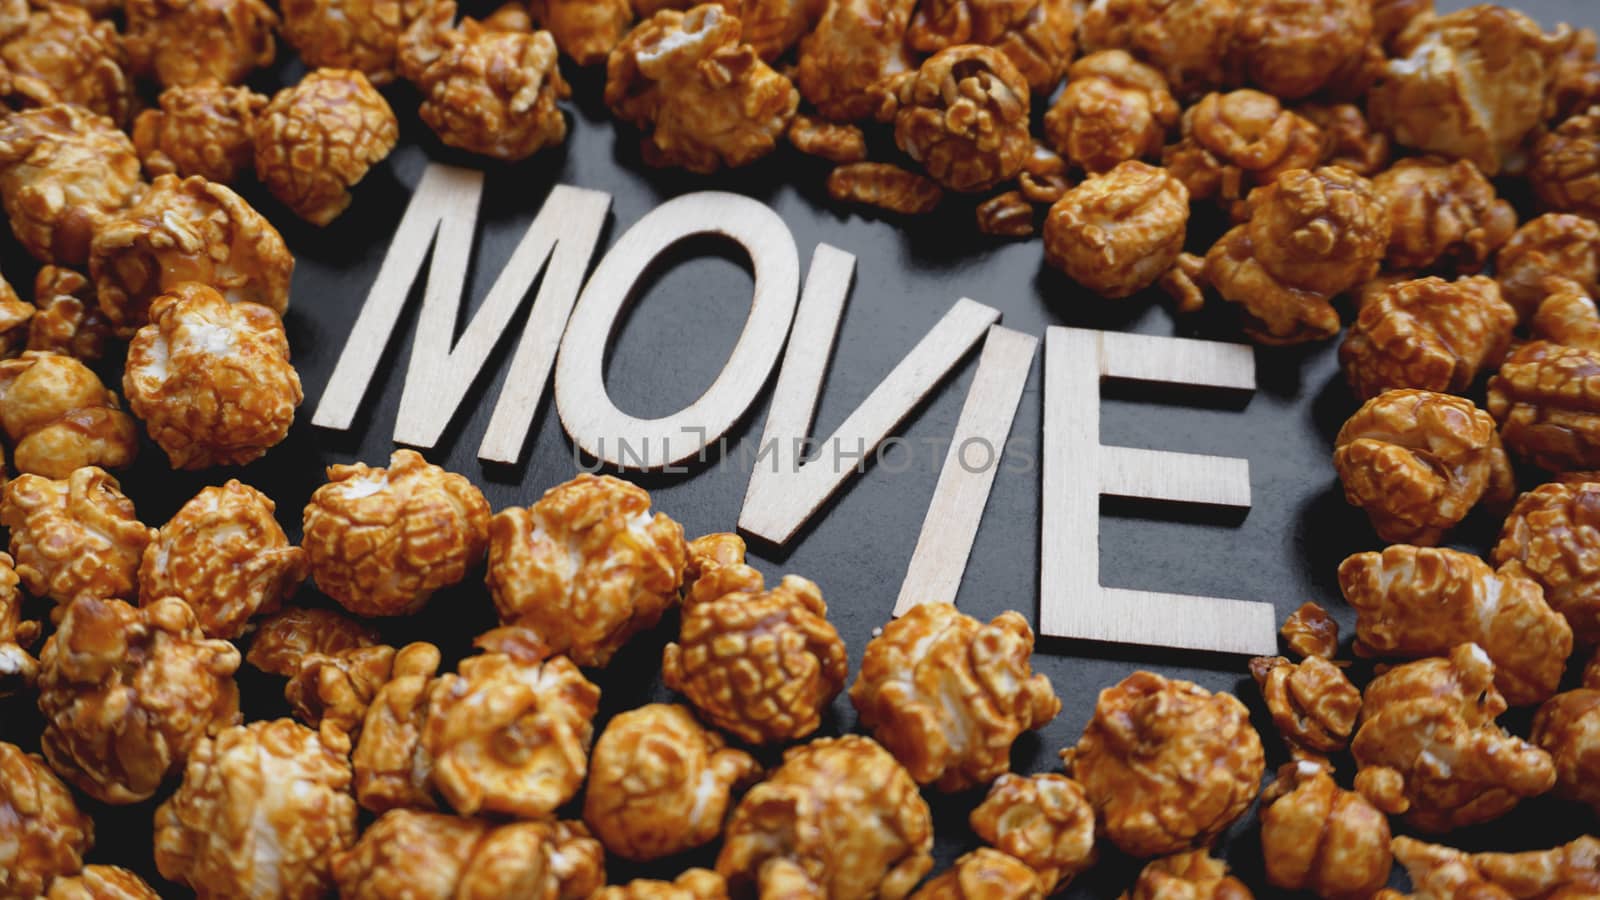 Golden caramel popcorn closeup. Background of popcorn. Snacks and food for a movie. Wooden letters Movie on a black background